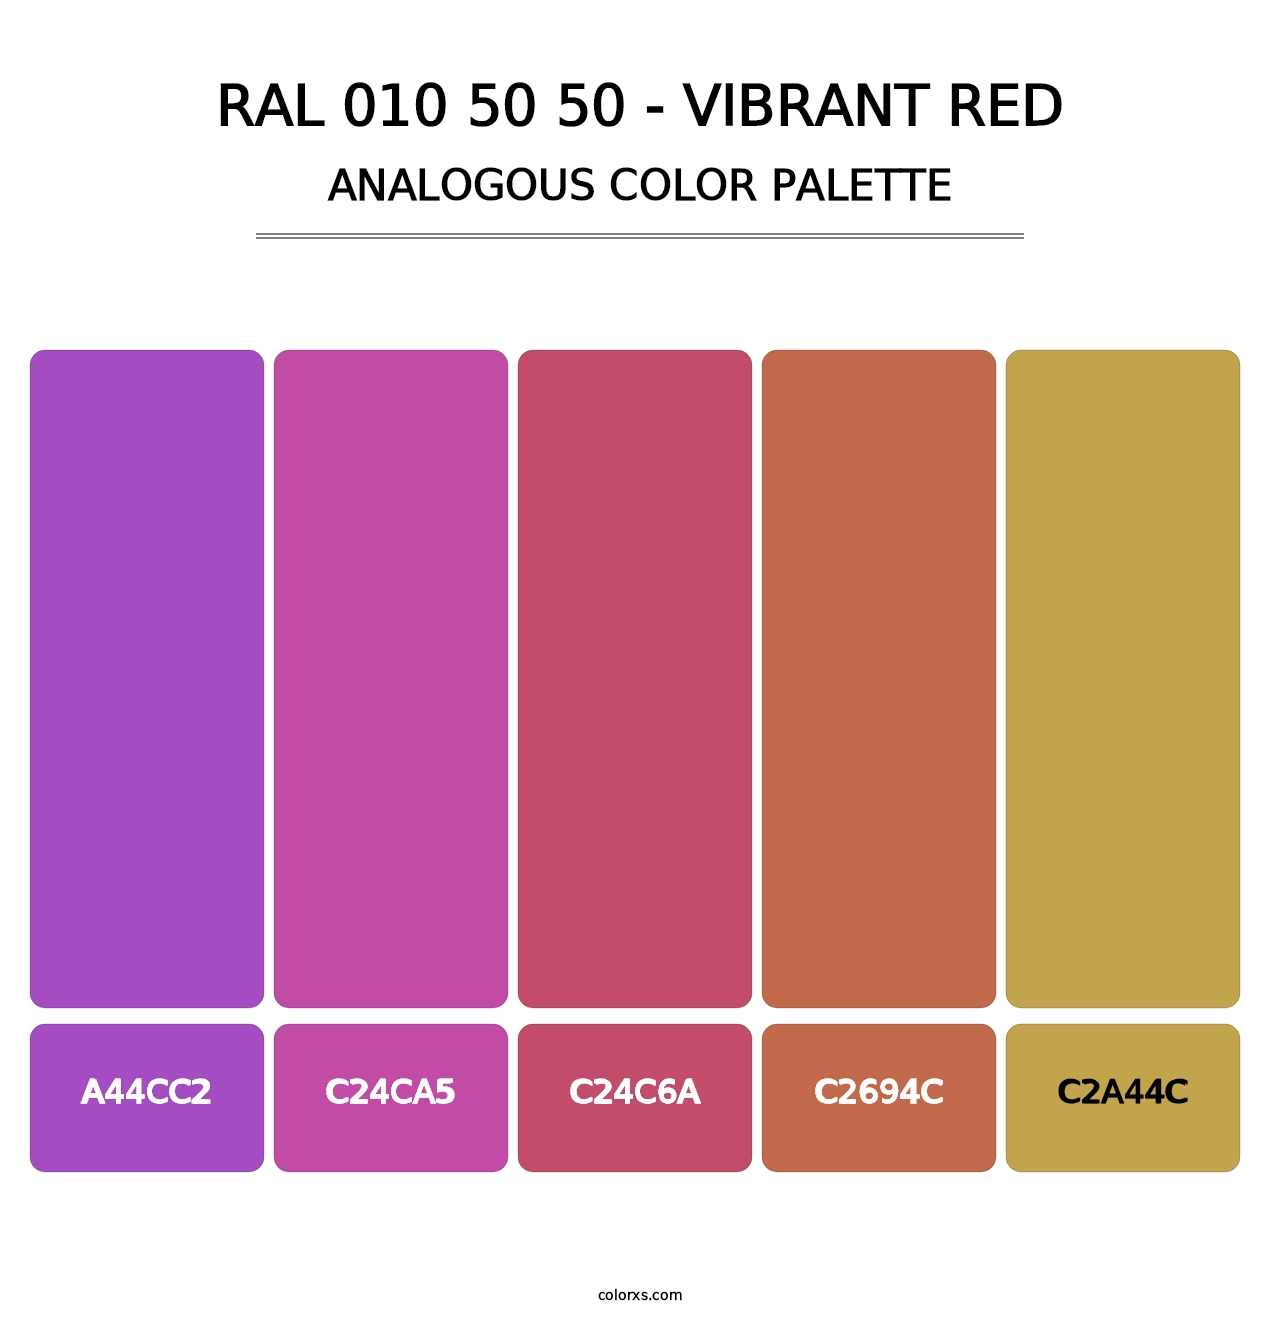 RAL 010 50 50 - Vibrant Red - Analogous Color Palette